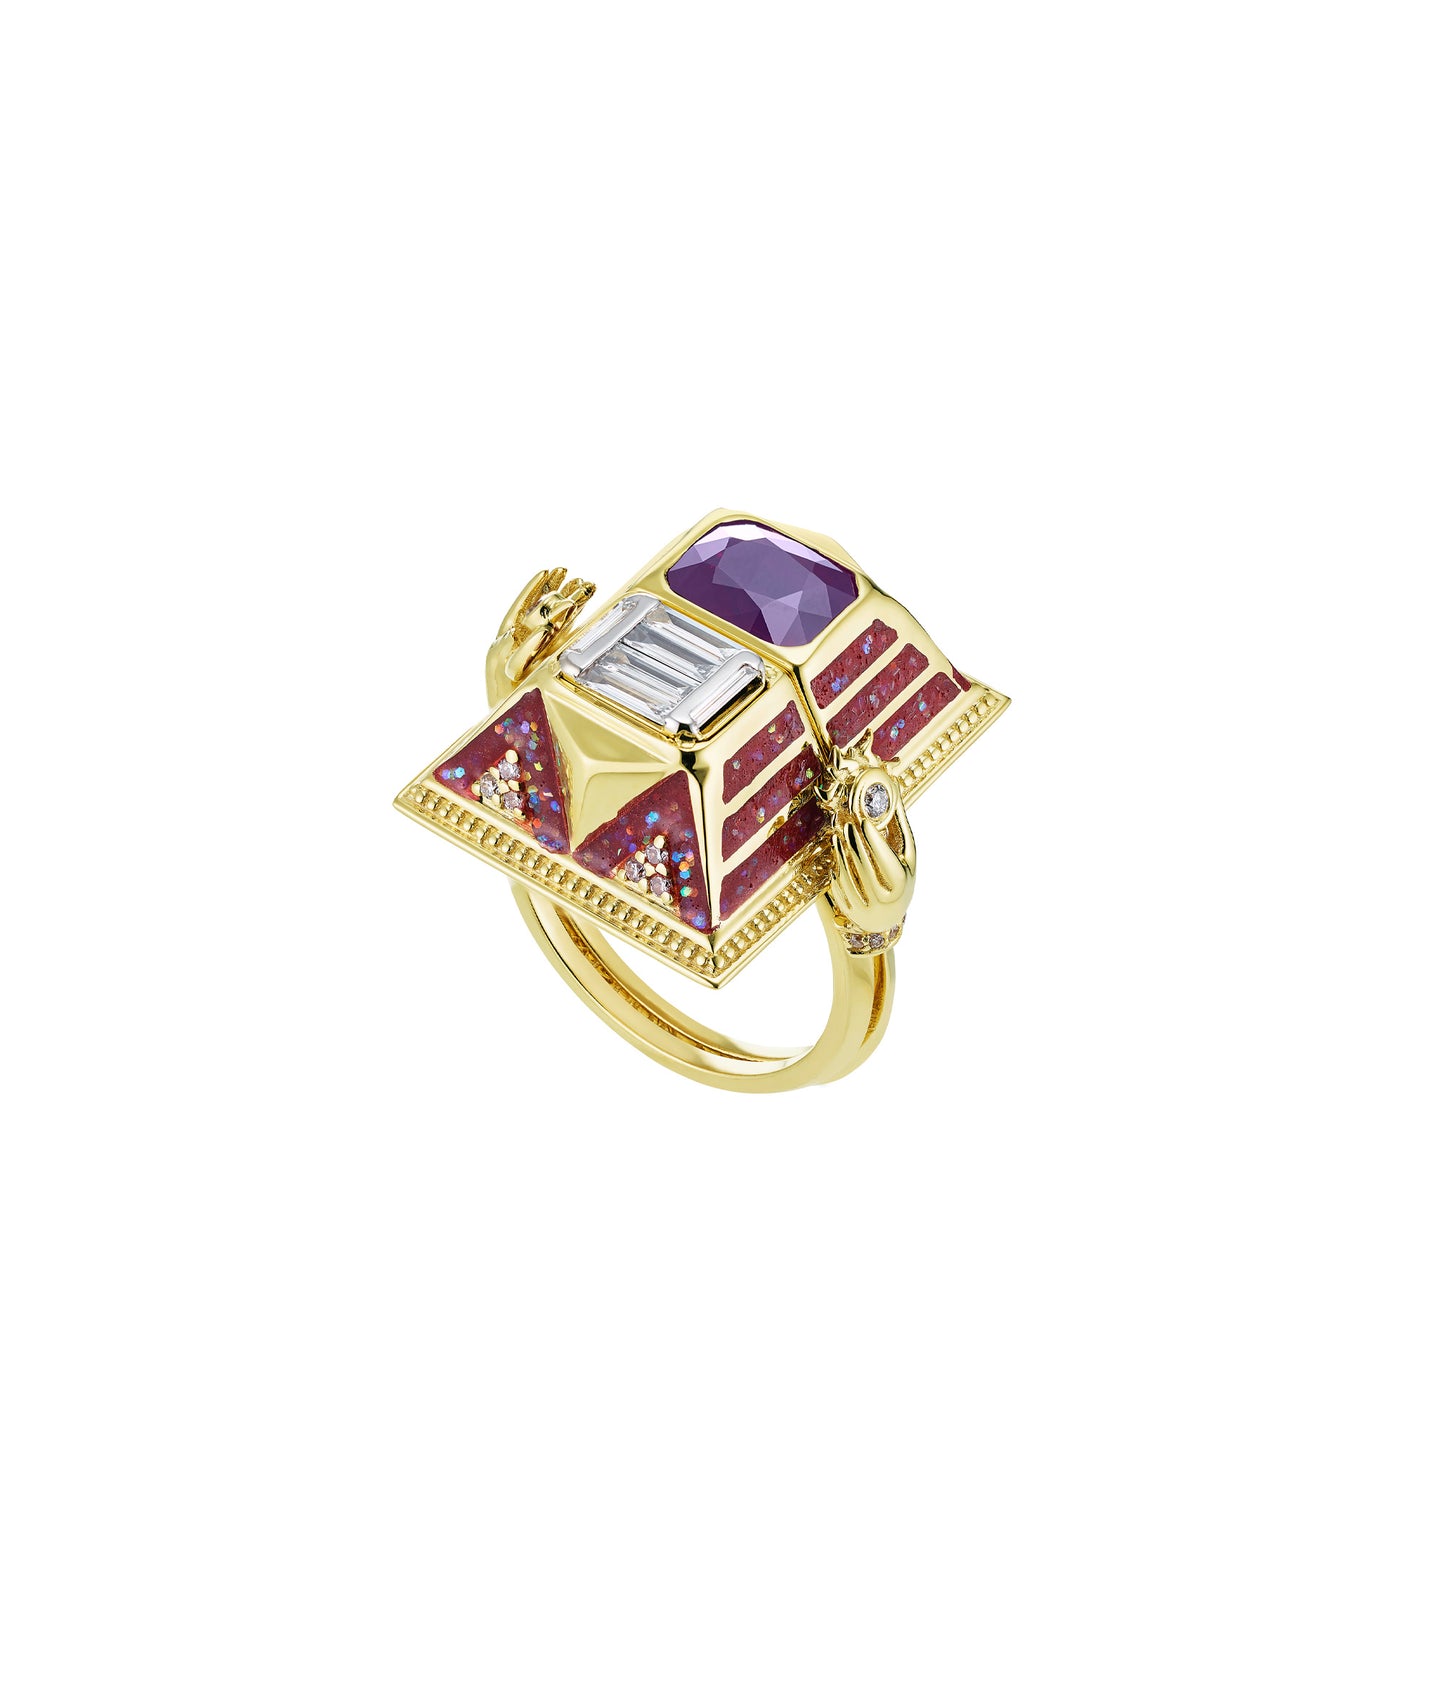 'Memento Mori' Diamond, Amethyst and ruby-red lacquer - Large Size